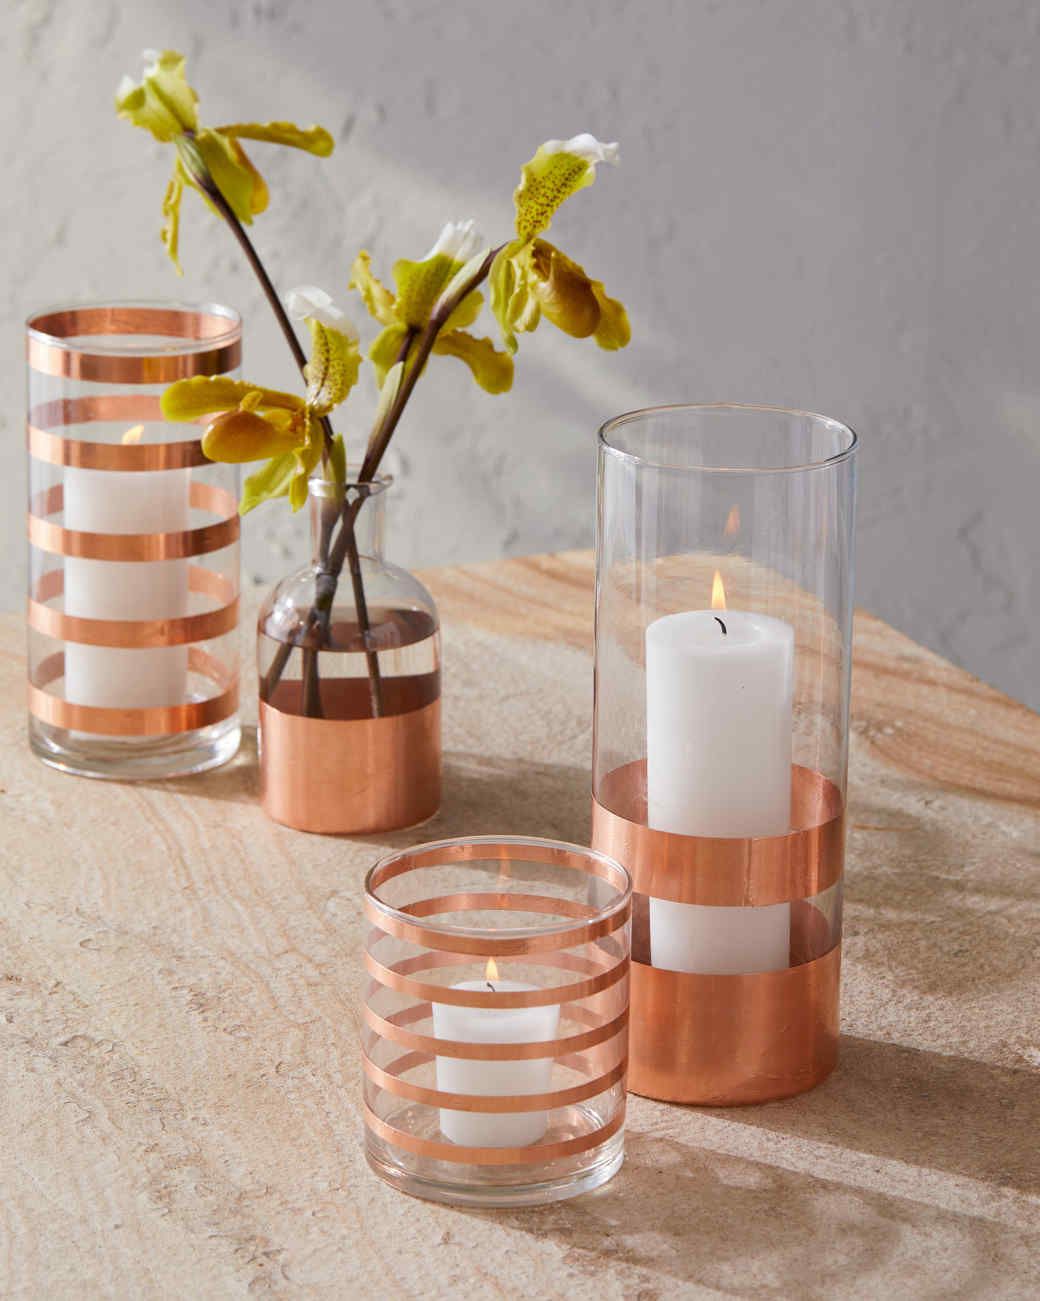 copper striped glassware containing candles